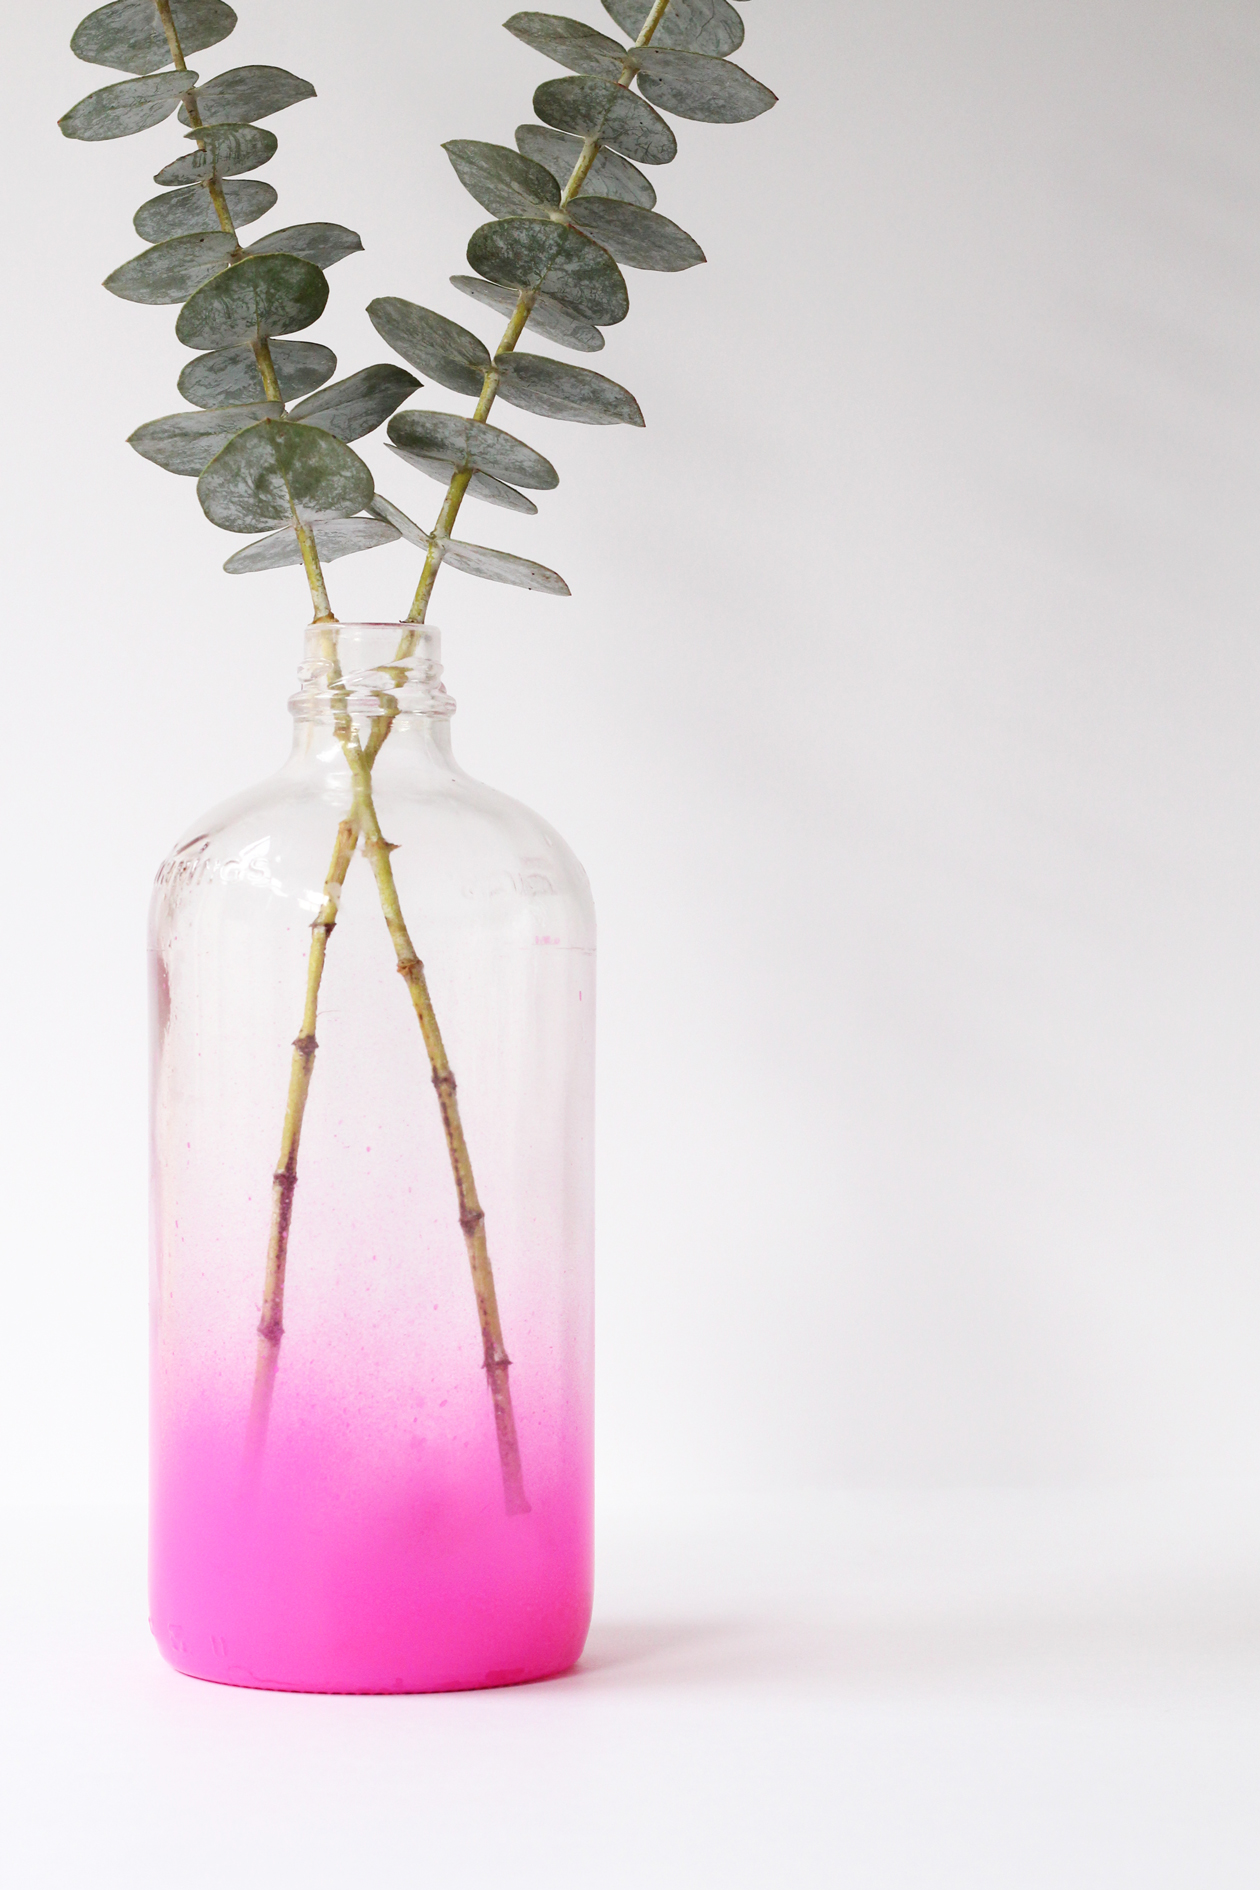 Before you recycle that bottle, turn it into a DIY vase with this easy tutorial!